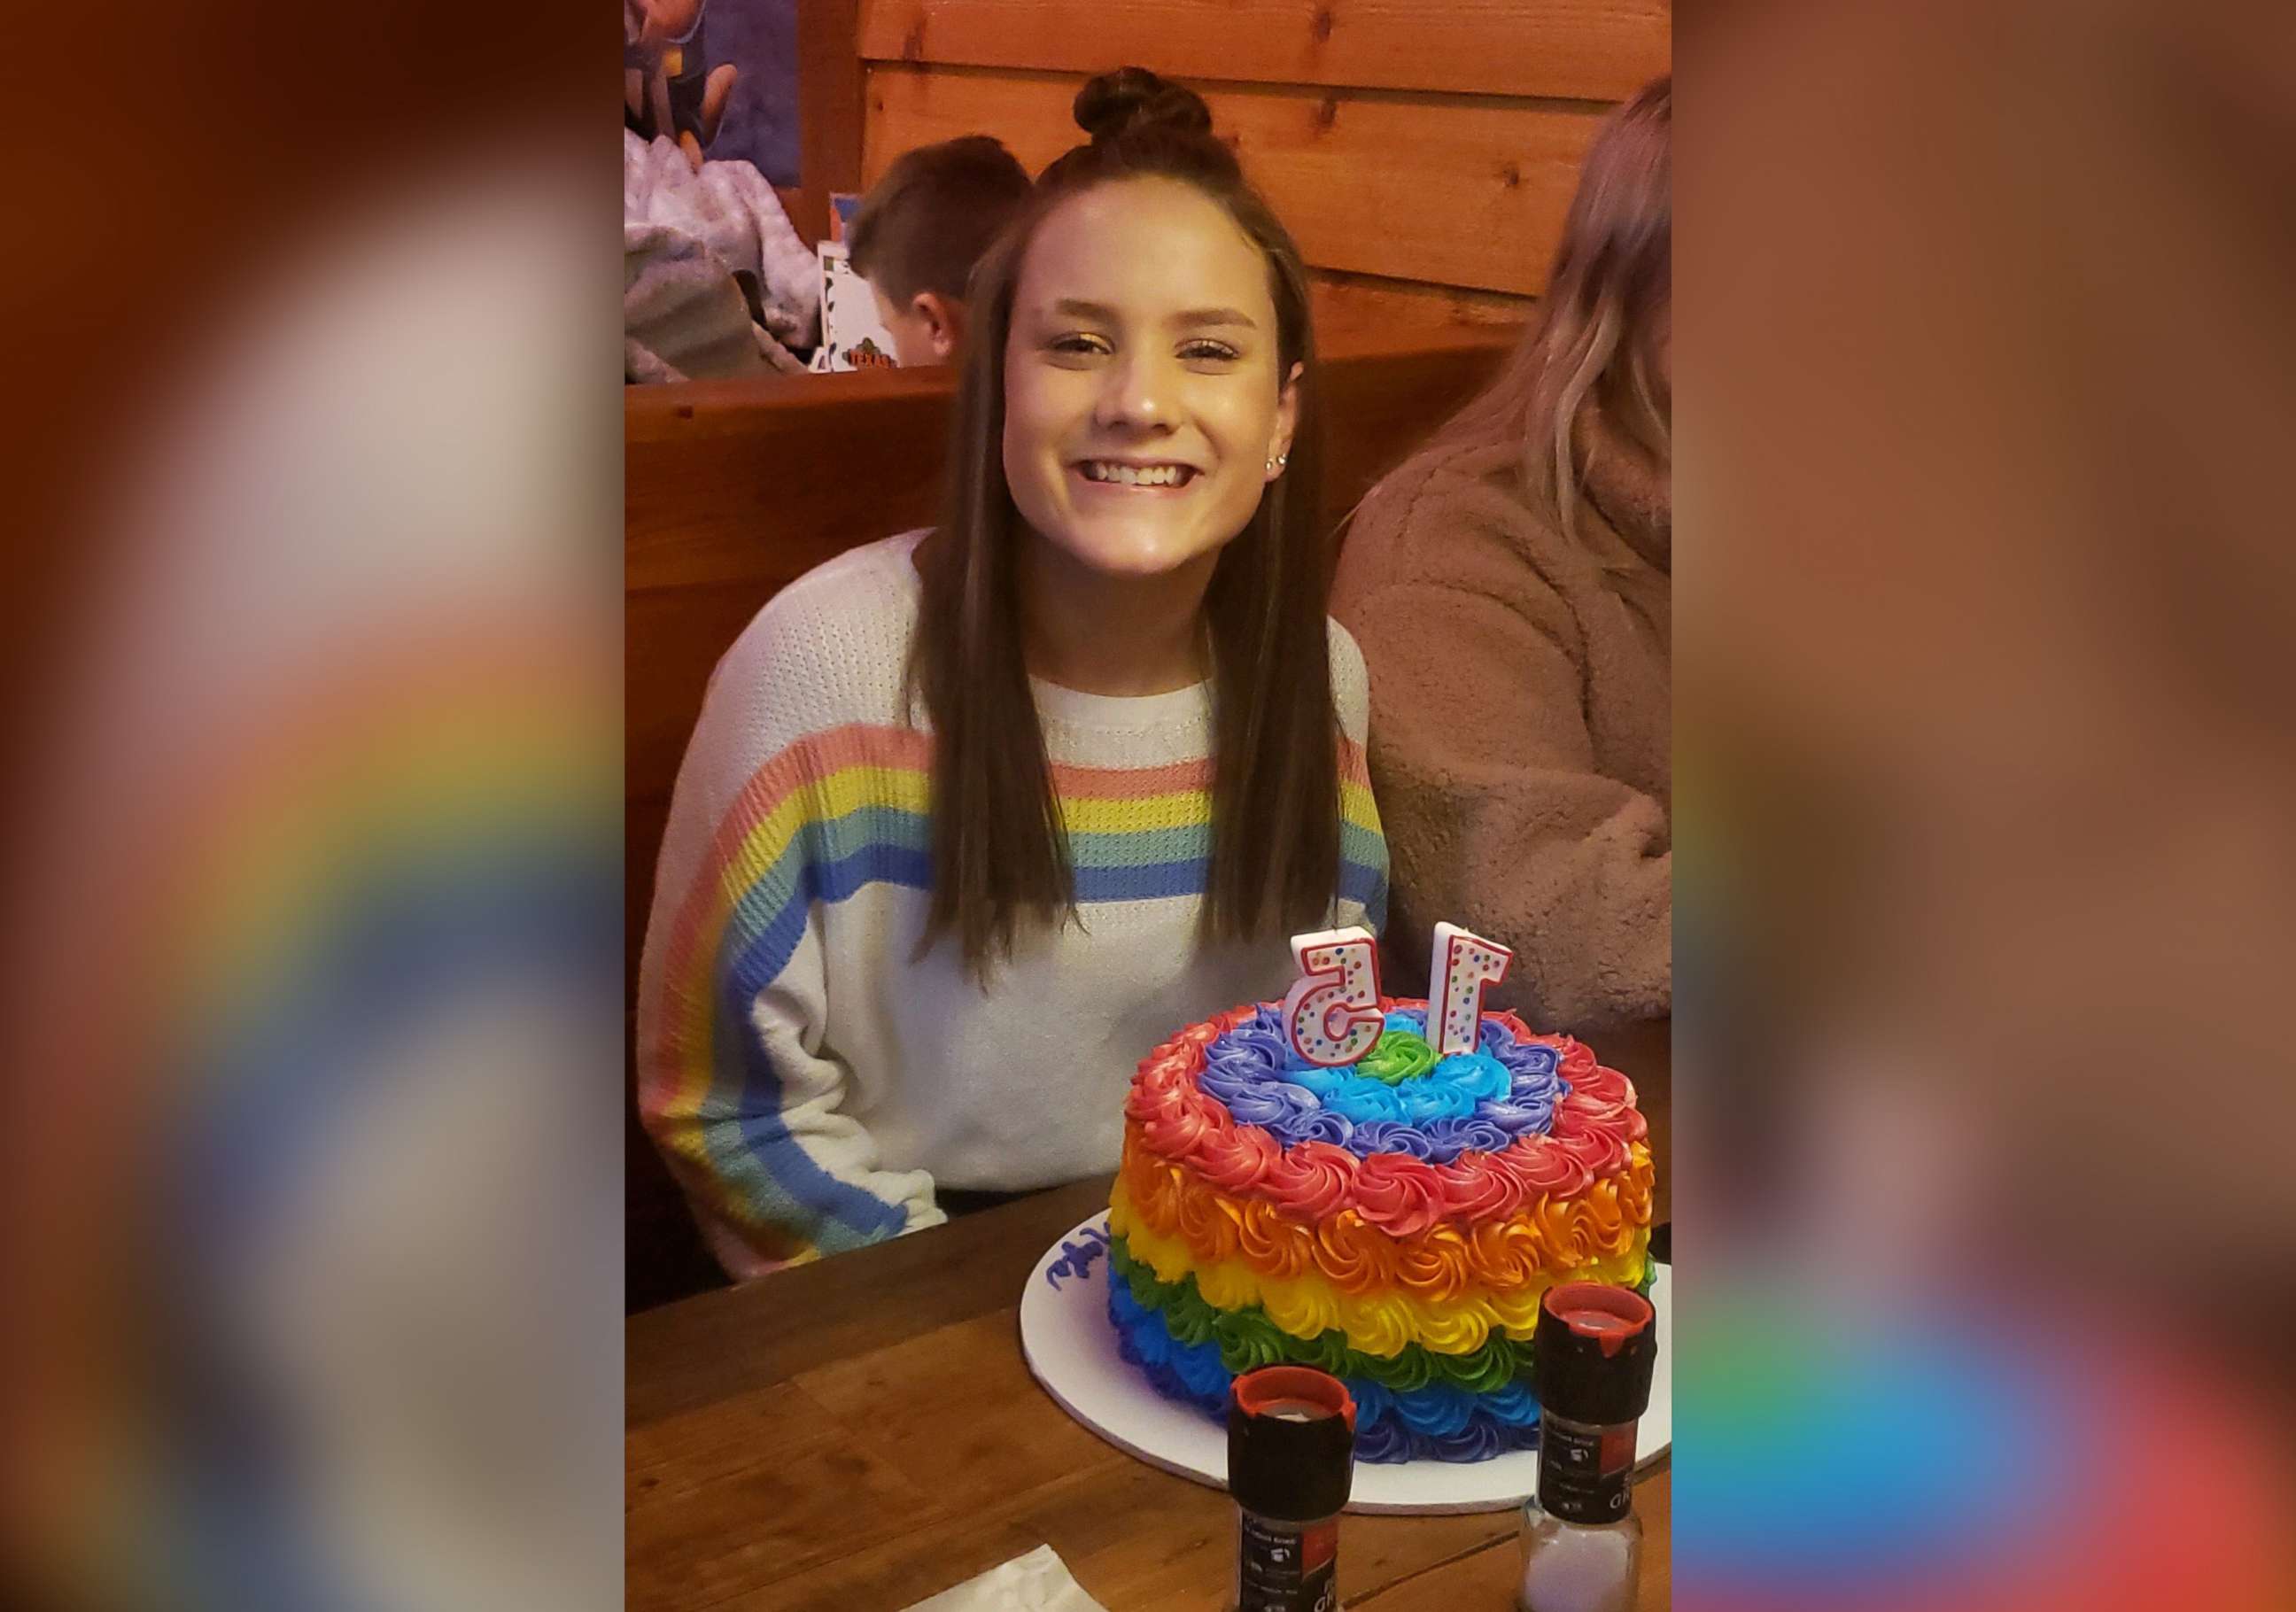 PHOTO: Kimberly Alford said her daughter, Kayla, was expelled from Whitefield Academy in Louisville, Ky., over an image of her with a rainbow-colored birthday cake.